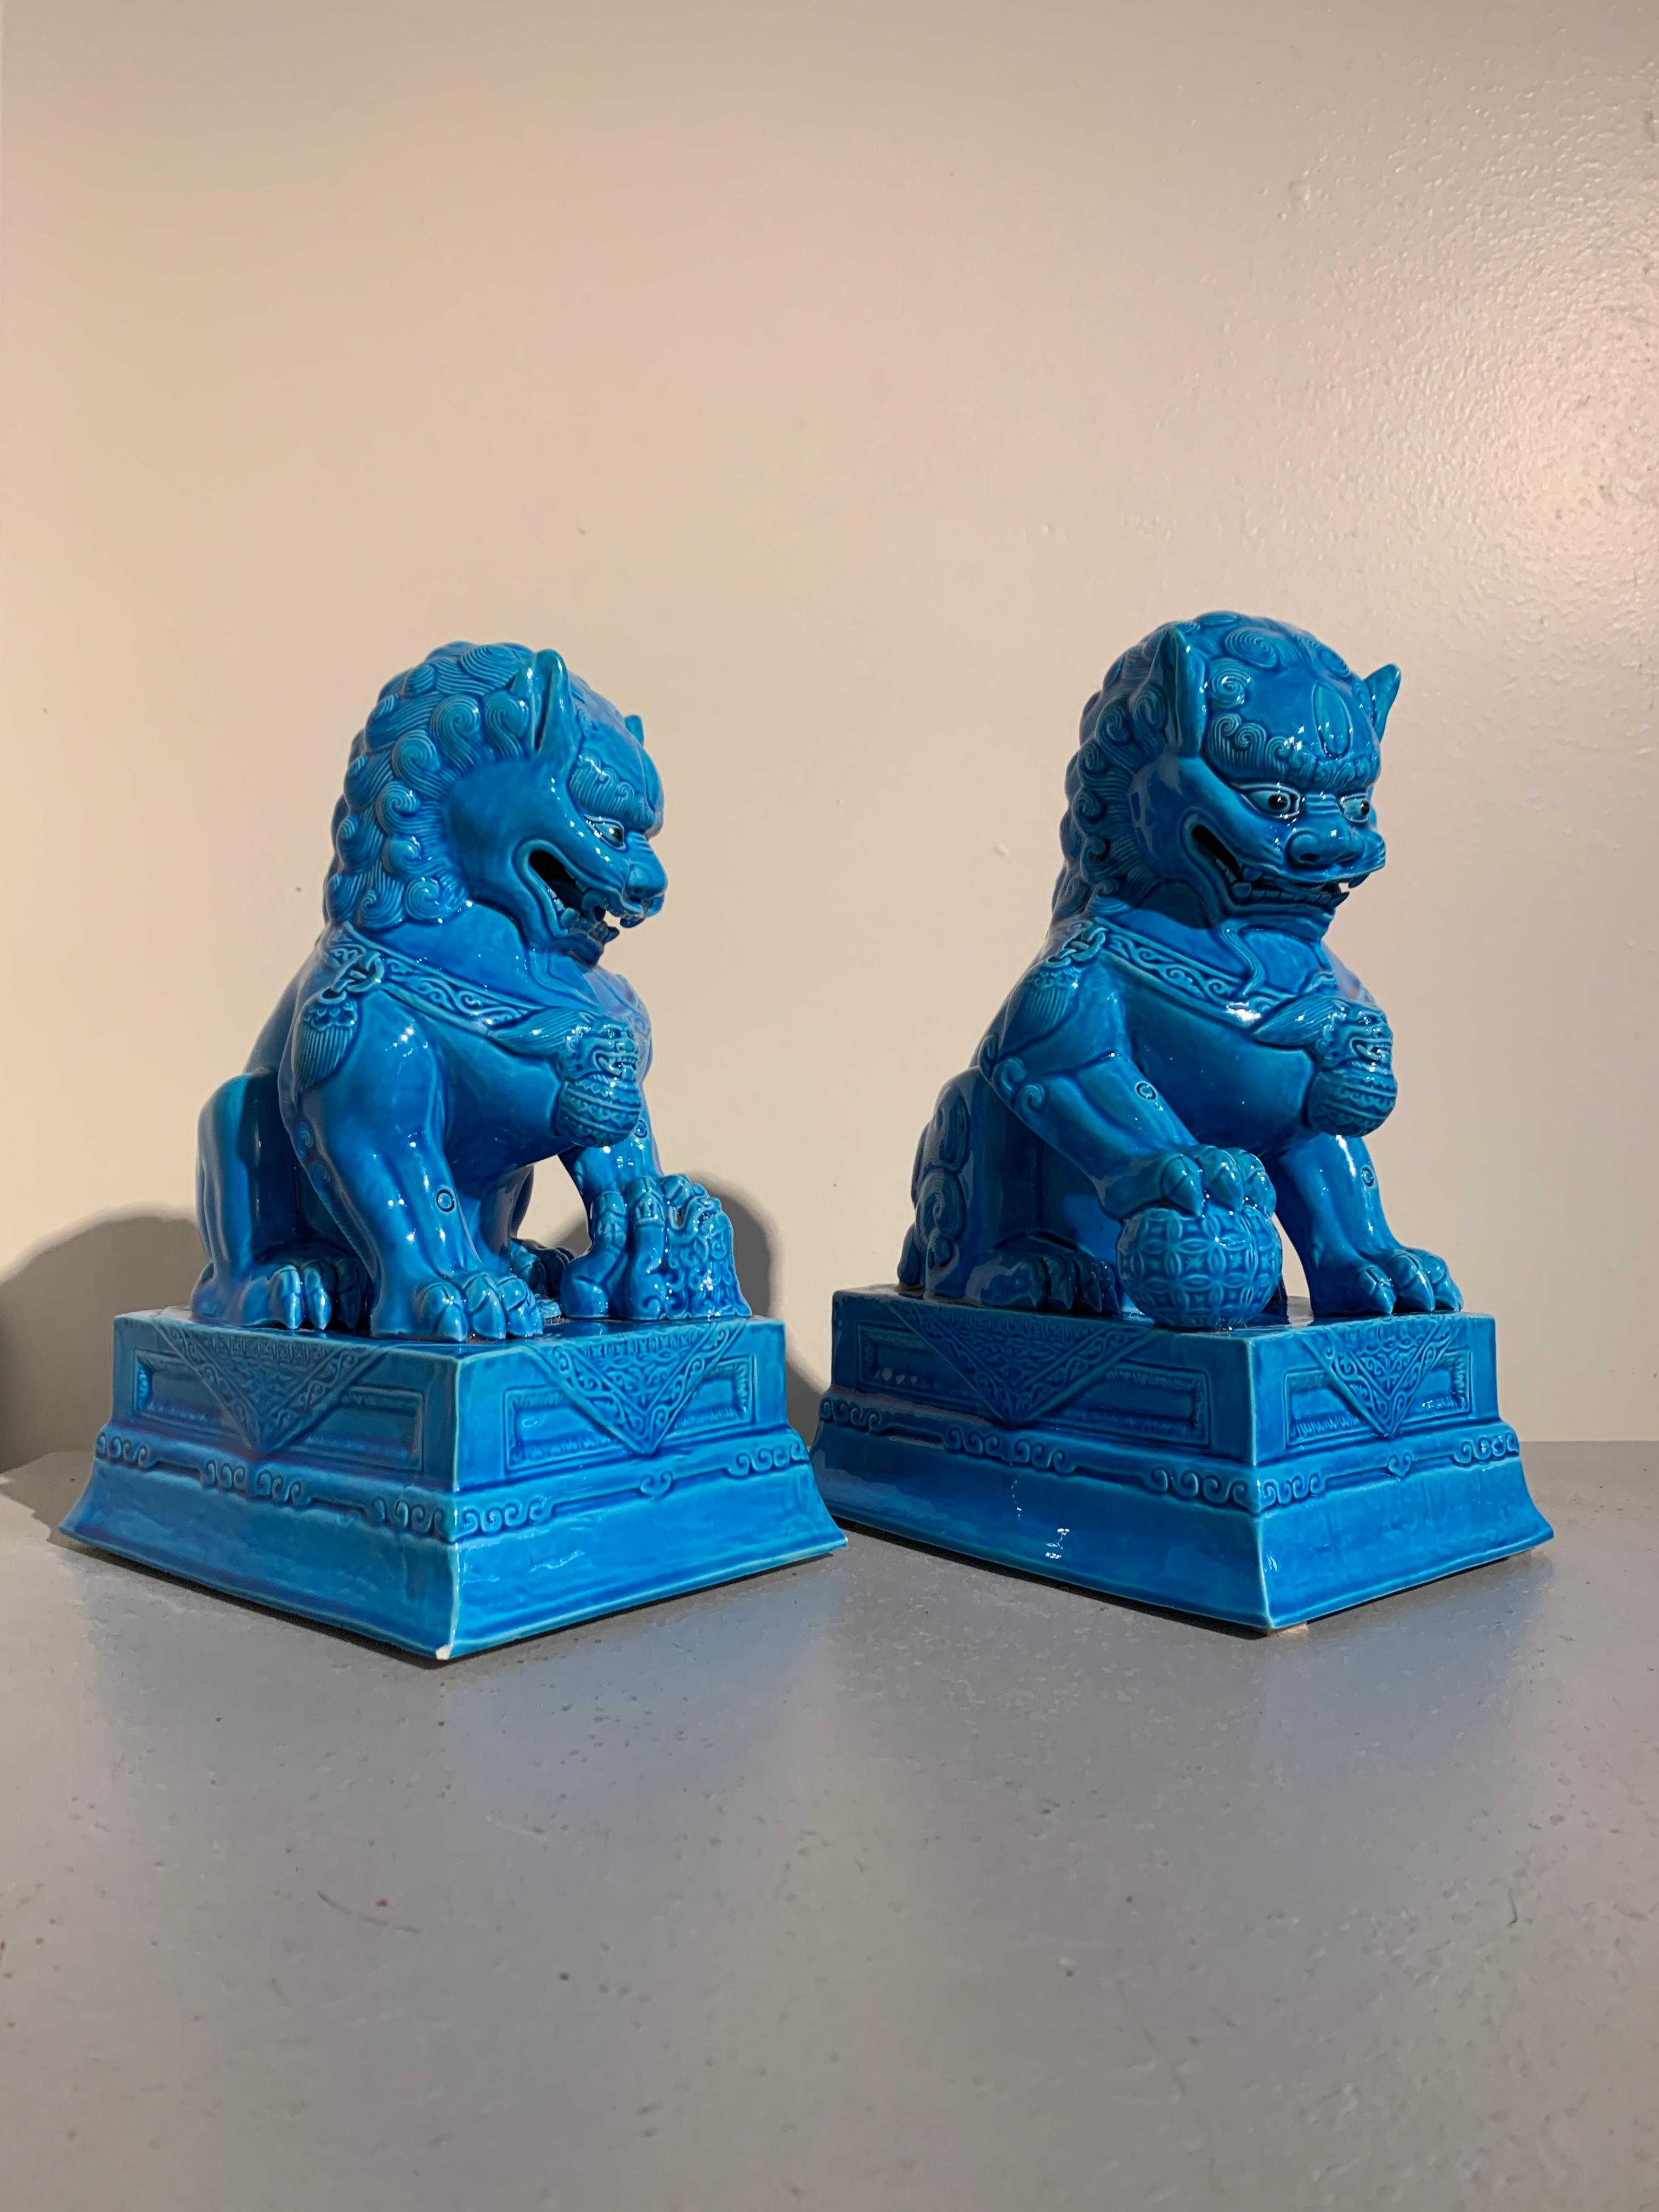 A striking pair of Vintage Chinese turquoise glazed porcelain foo dogs or guardian lions, circa 1980s. 

The pair of lions, modeled after the pair of Ming Dynasty carved stone lions that guard the Forbidden City in Beijing, sit upon their haunches